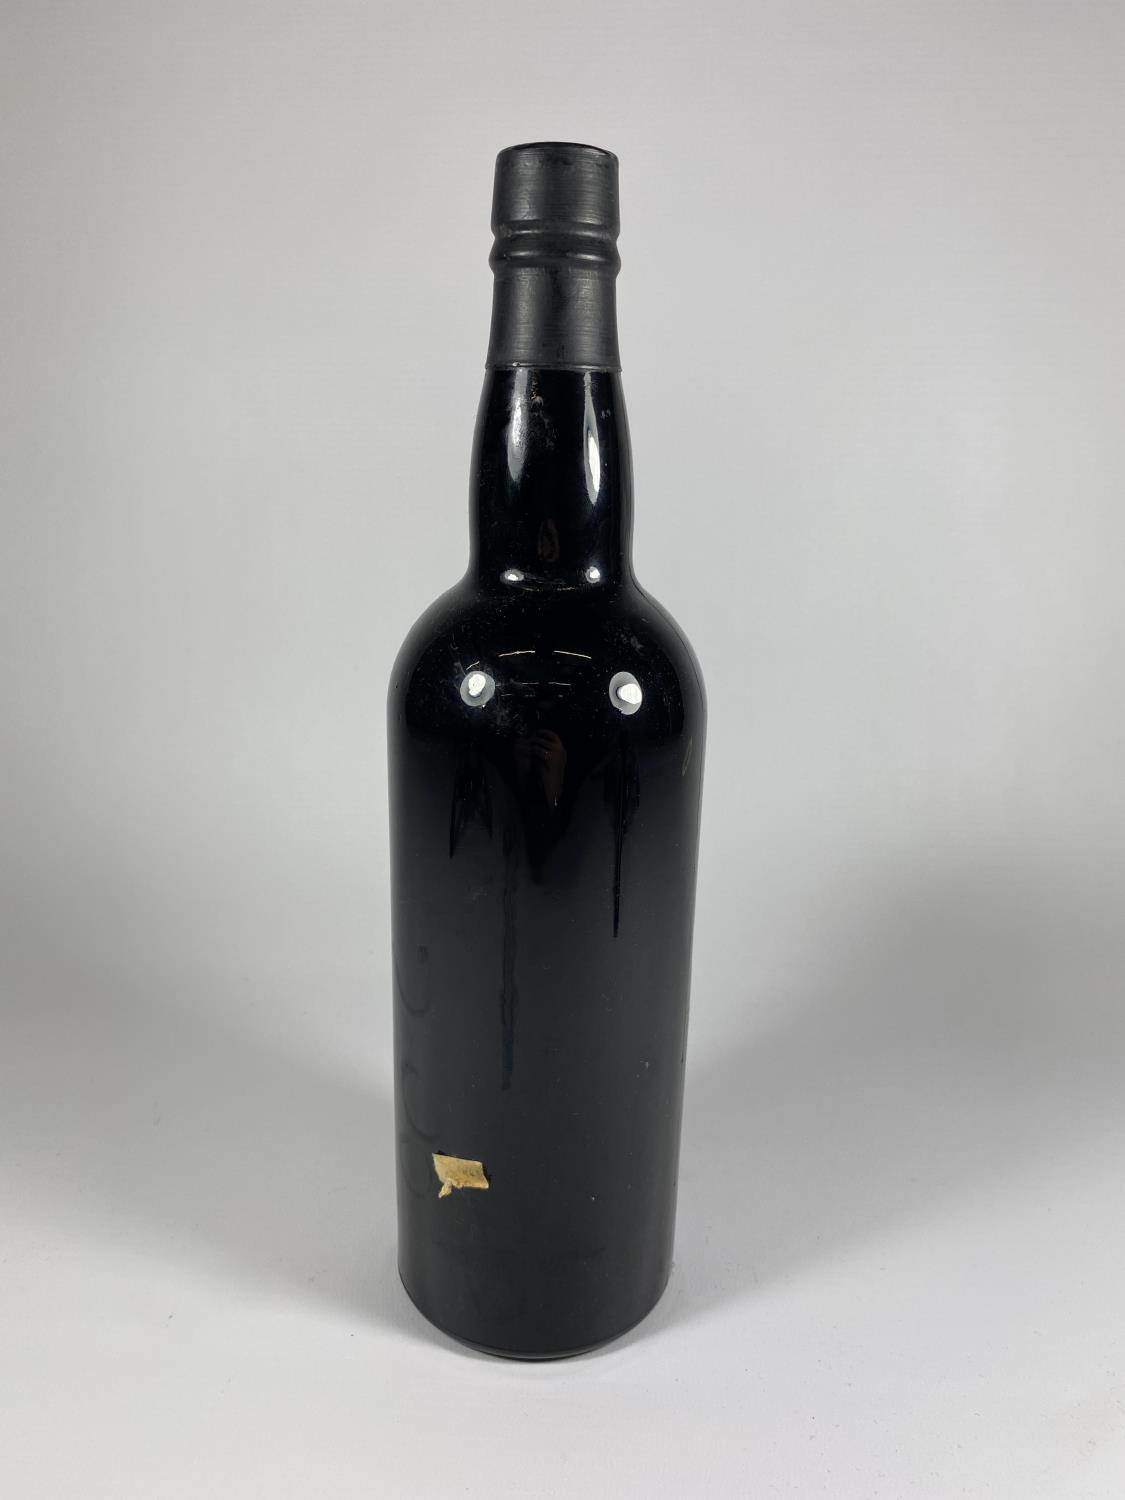 1 X 75CL BOTTLE - CHURCHILL'S CRUSTED 1988 VINTAGE PORT - Image 4 of 4